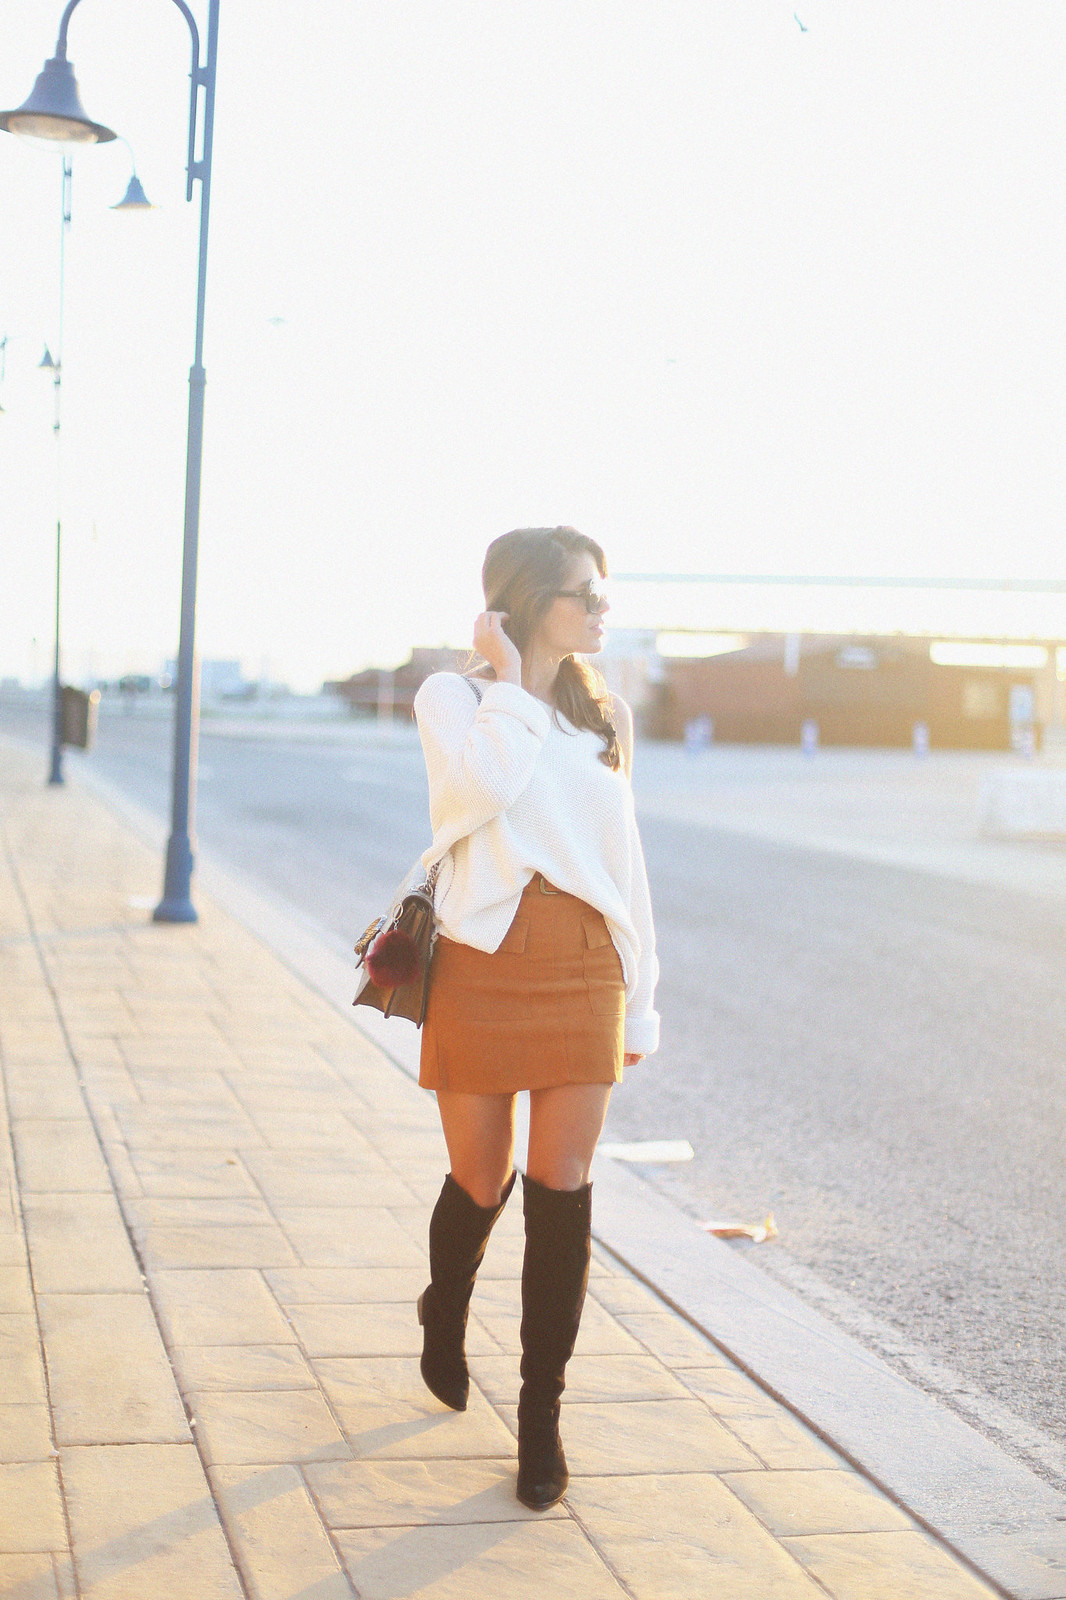 5. jessie chanes - white oversized sweater camel suede skirt over the knee black boots dionysus gucci bag